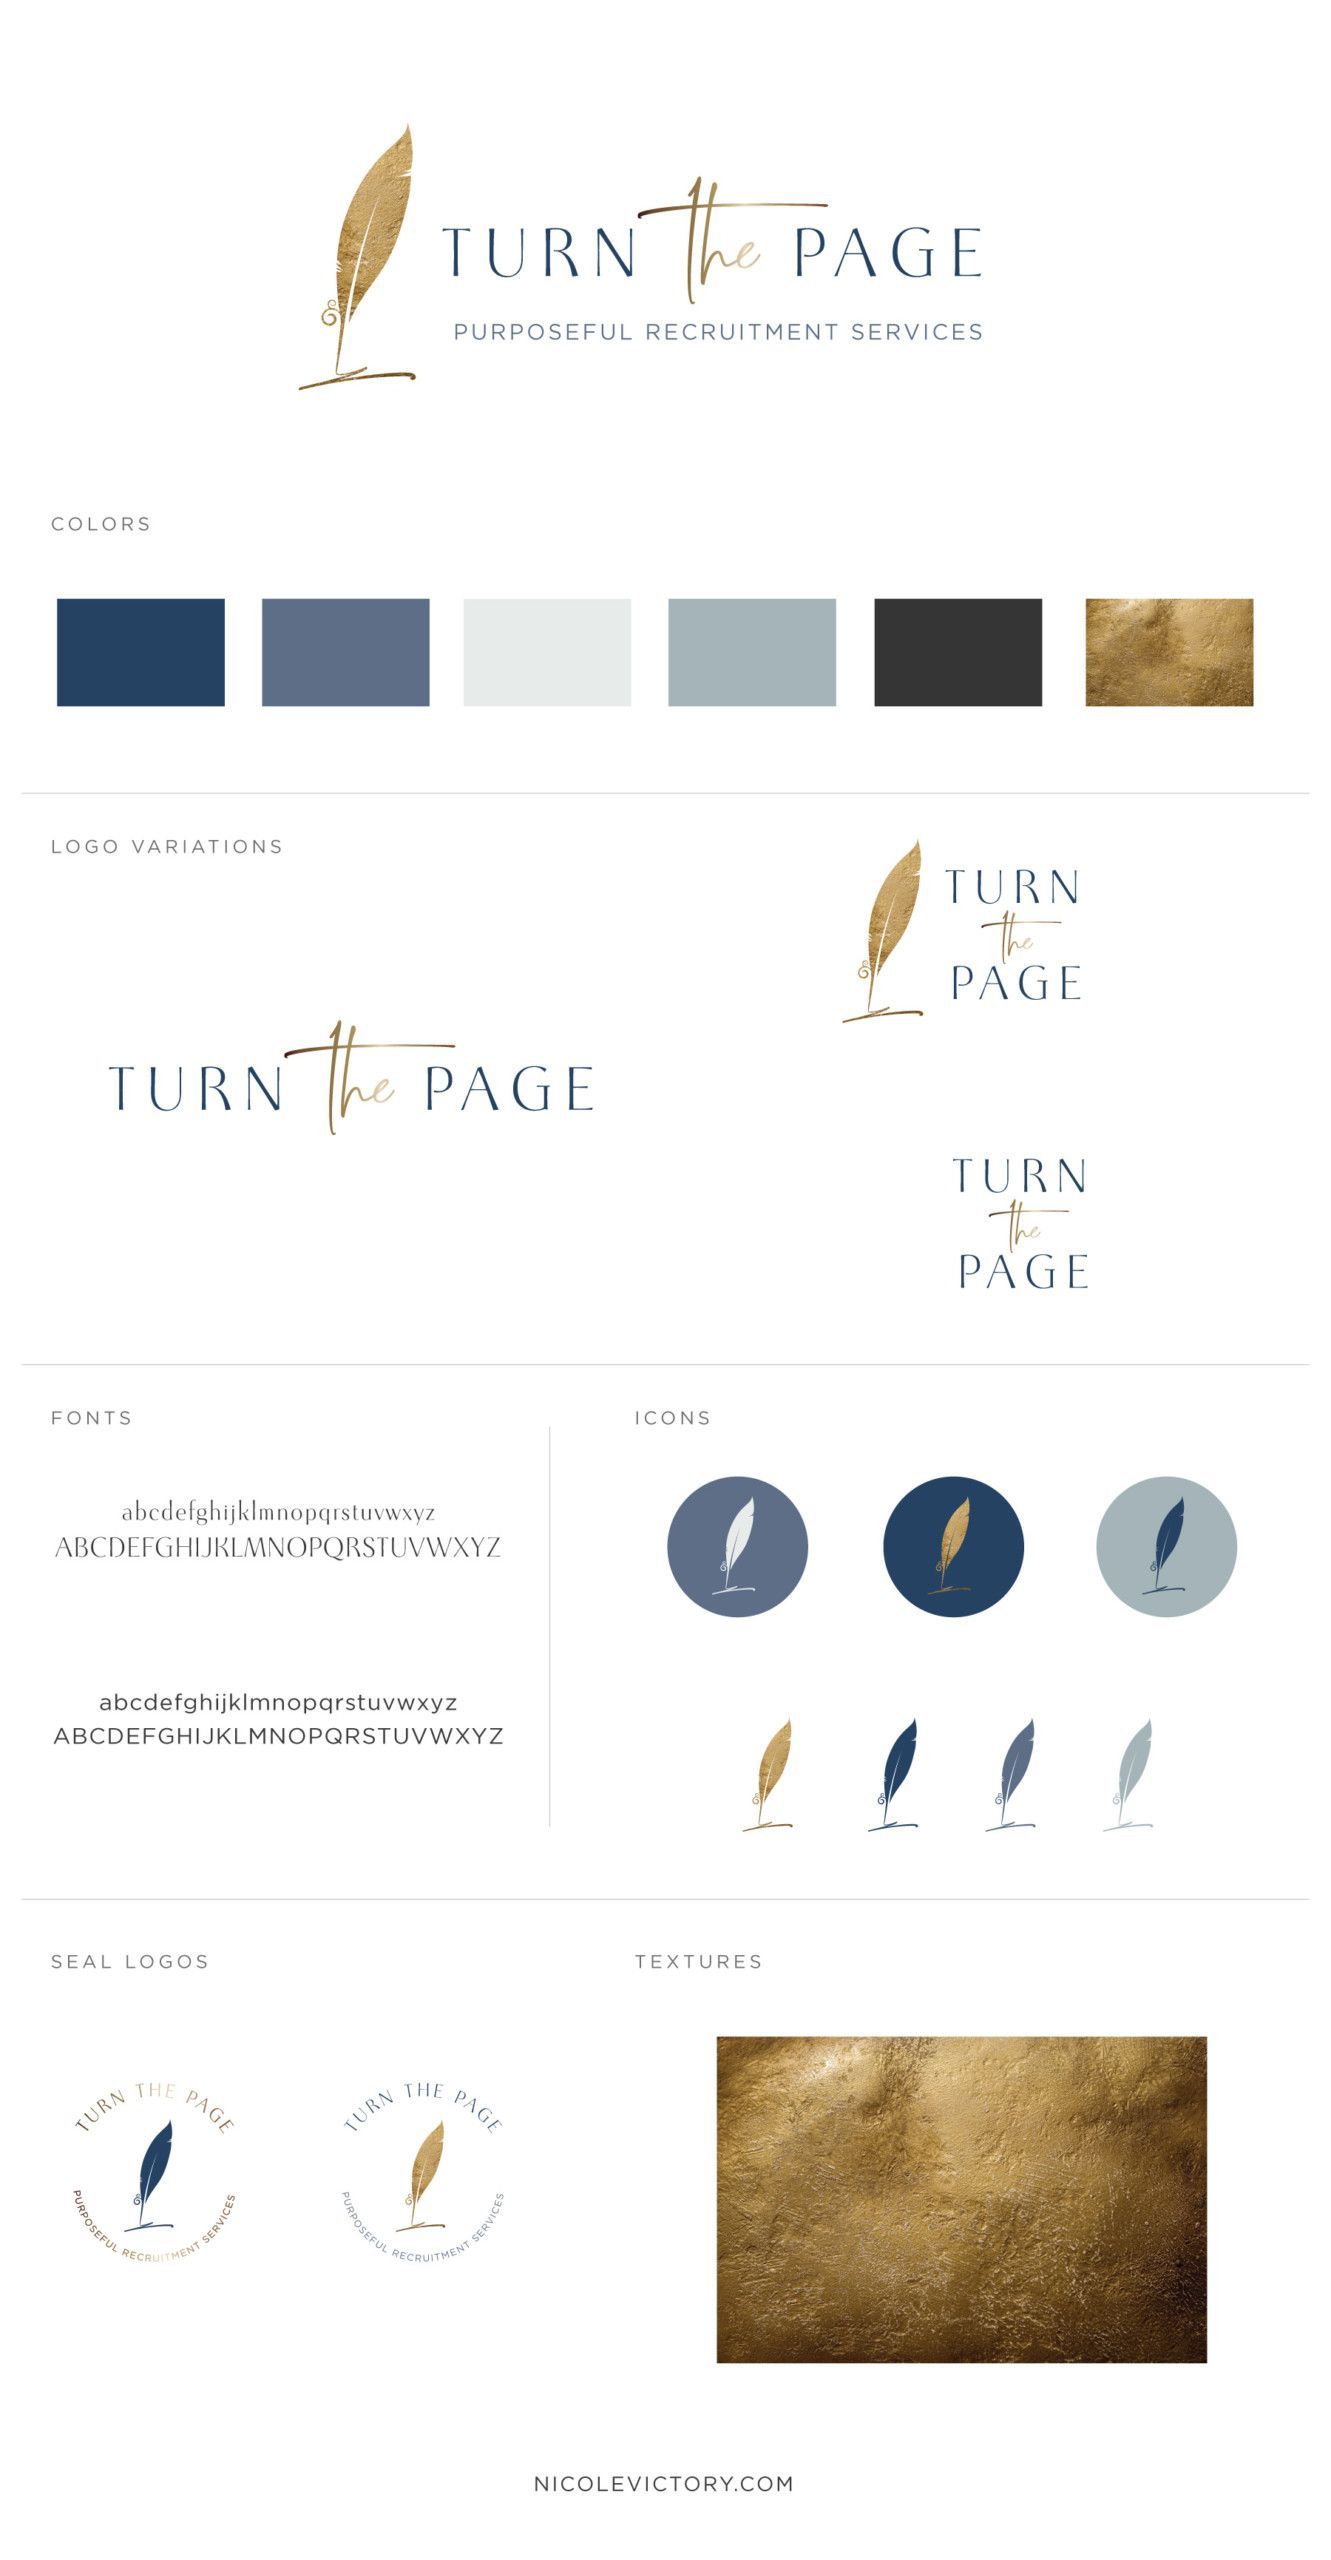 Style Guide | Recruiter Branding, Logo, and Website Design for Turn The Page - Style Guide | Recruiter Branding, Logo, and Website Design for Turn The Page -   19 graphic style Guides ideas